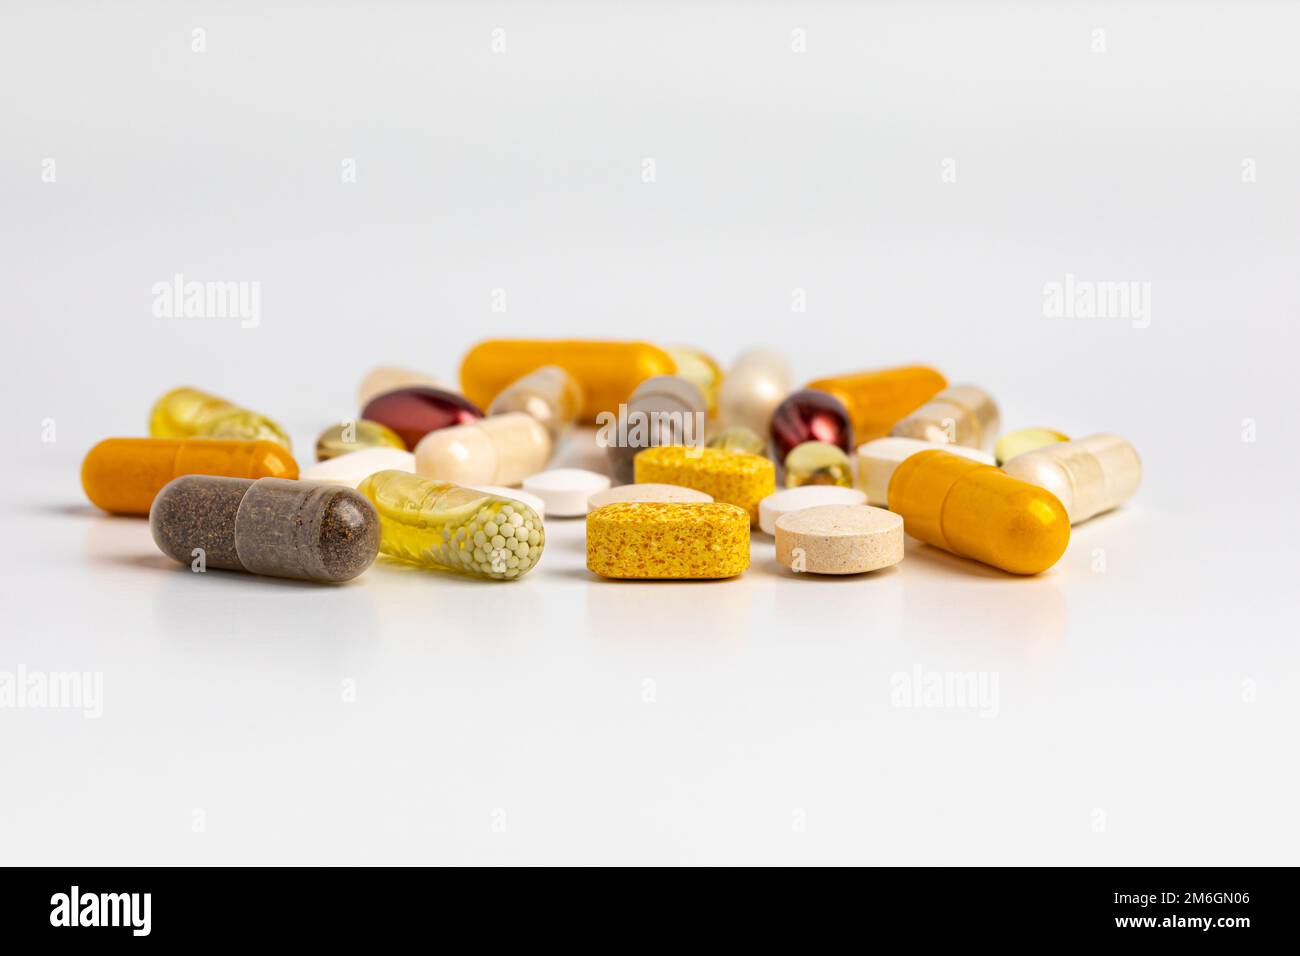 Variety of vitamins and nutritional supplements isolated on white background. Wellness, health care and nutrition concept. Stock Photo